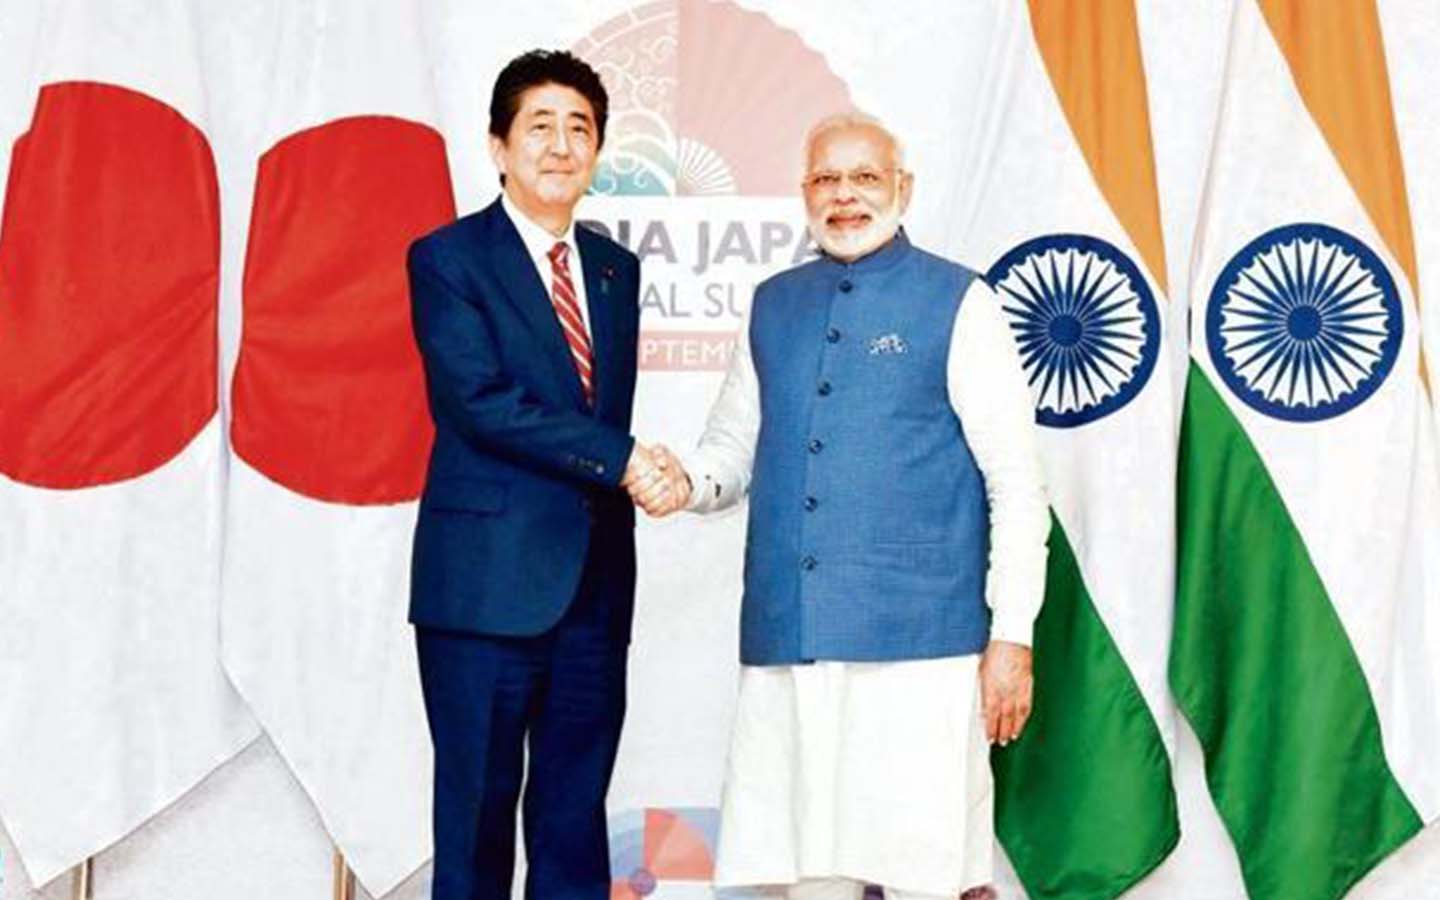 PM Narendra Modi was welcomed by Japanese PM Shinzo Abe